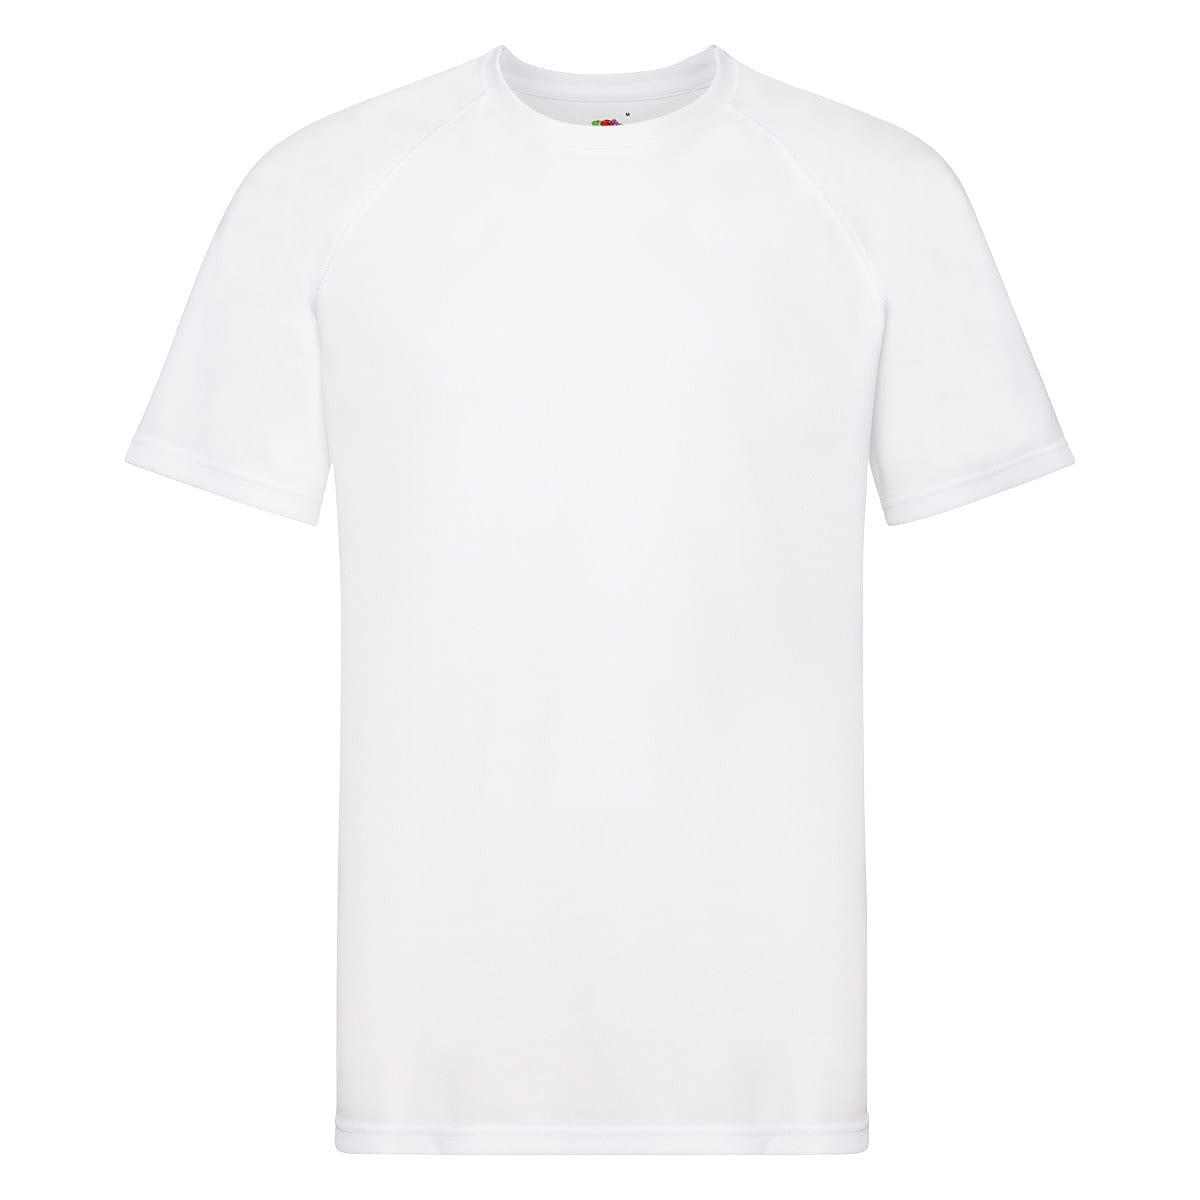 Fruit Of The Loom Mens Performance T-Shirt in White (Product Code: 61390)